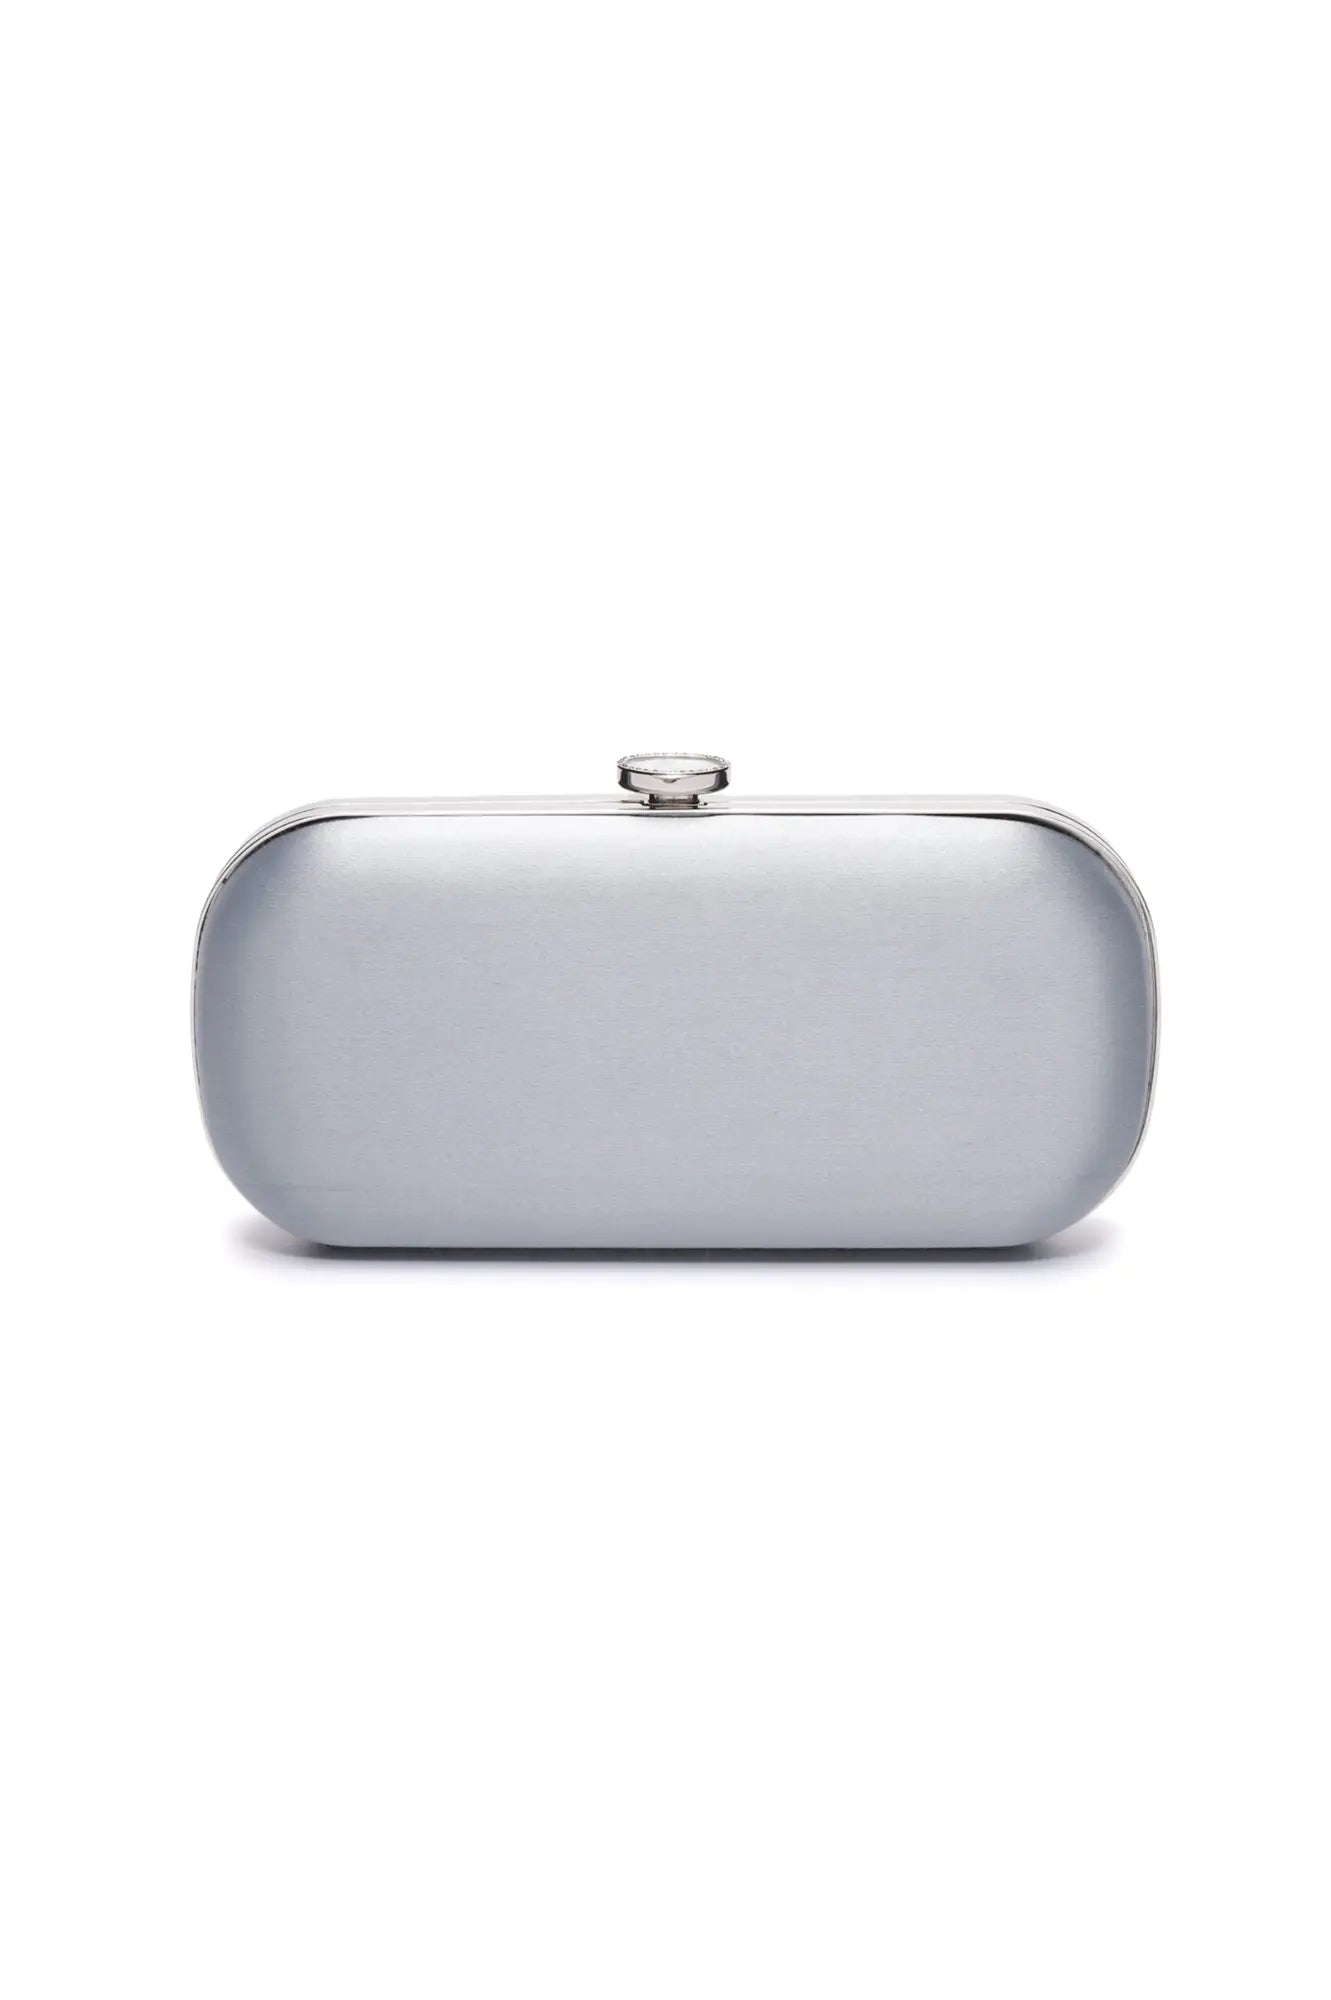 Bella Clutch Steel Blue Satin Grande evening clutch purse from The Bella Rosa Collection against a white background.